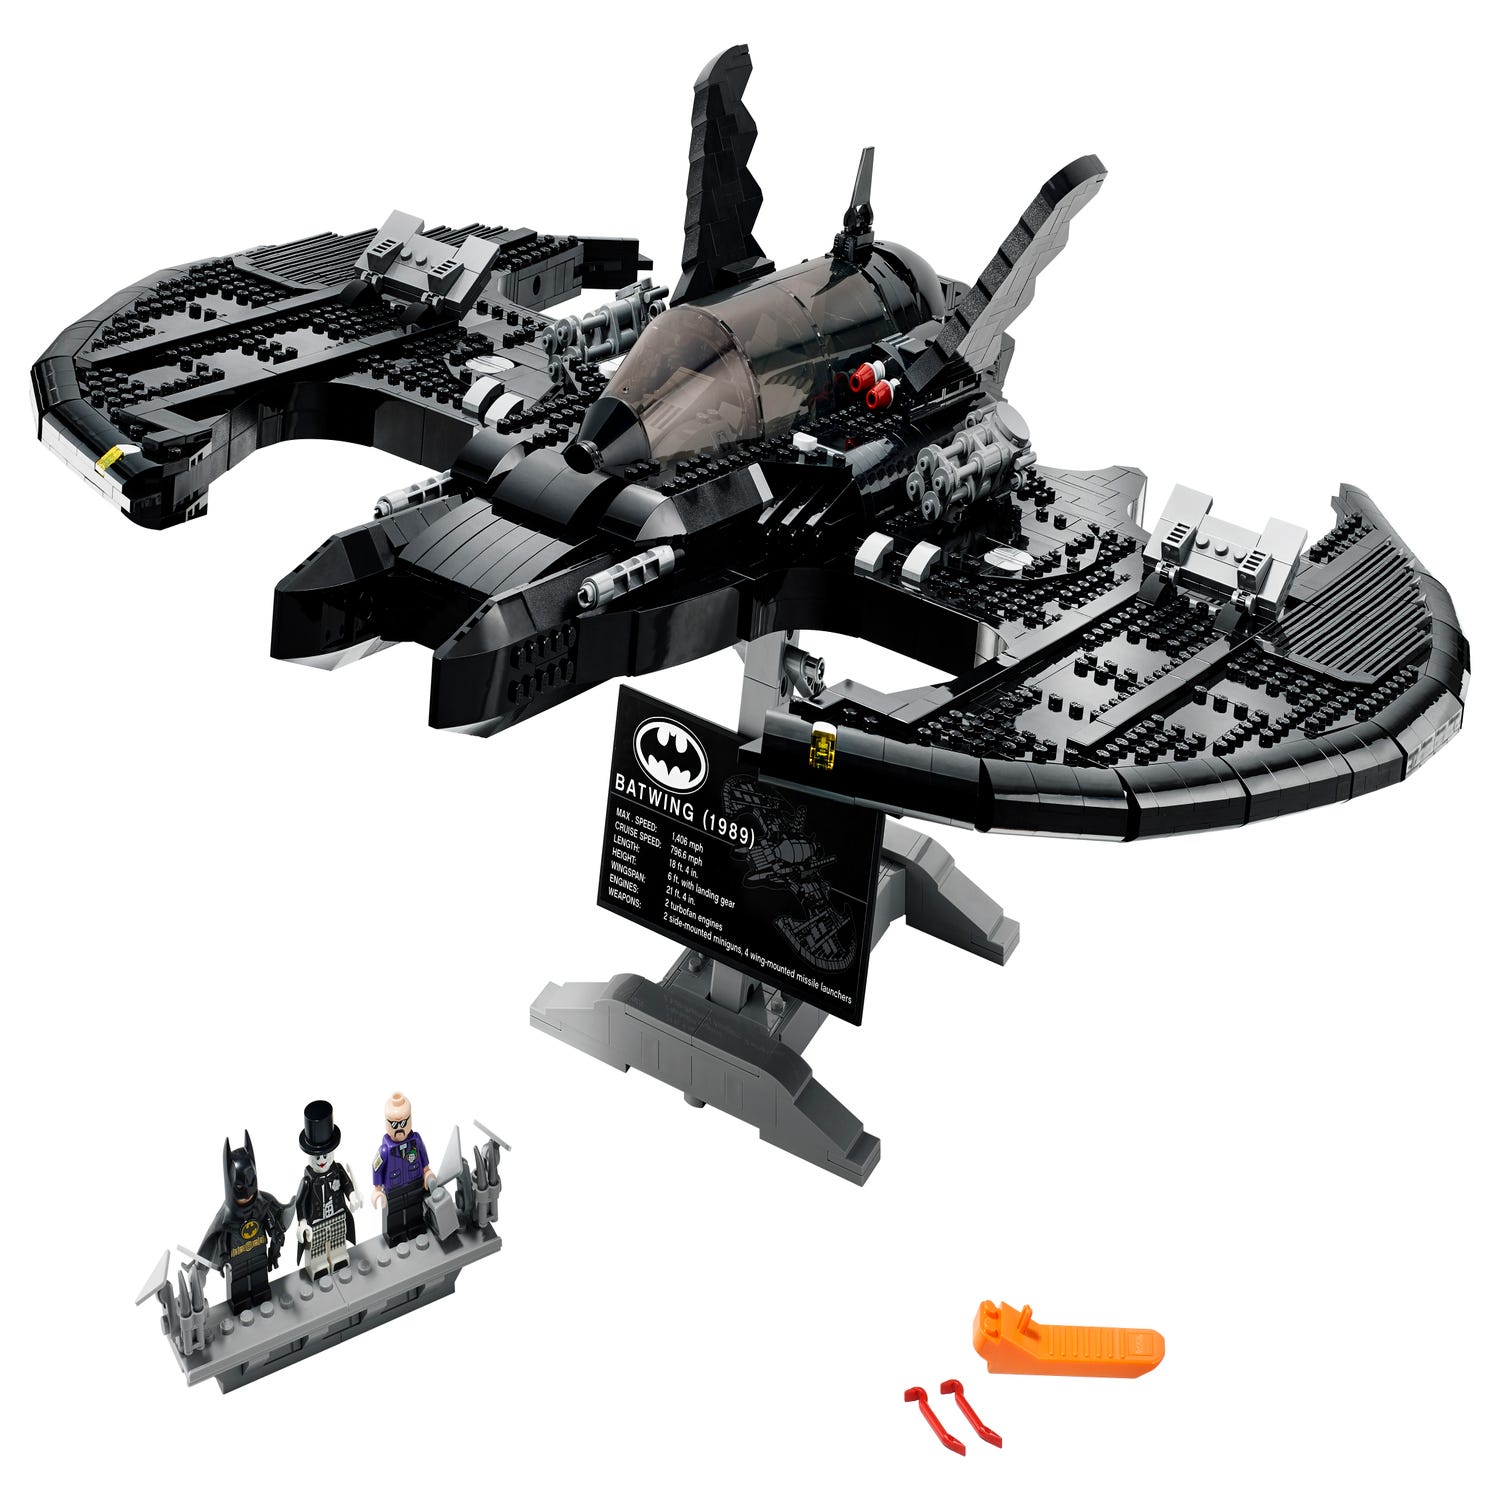 1989 Batwing 76161 | DC | Buy online at the Official LEGO® Shop HU